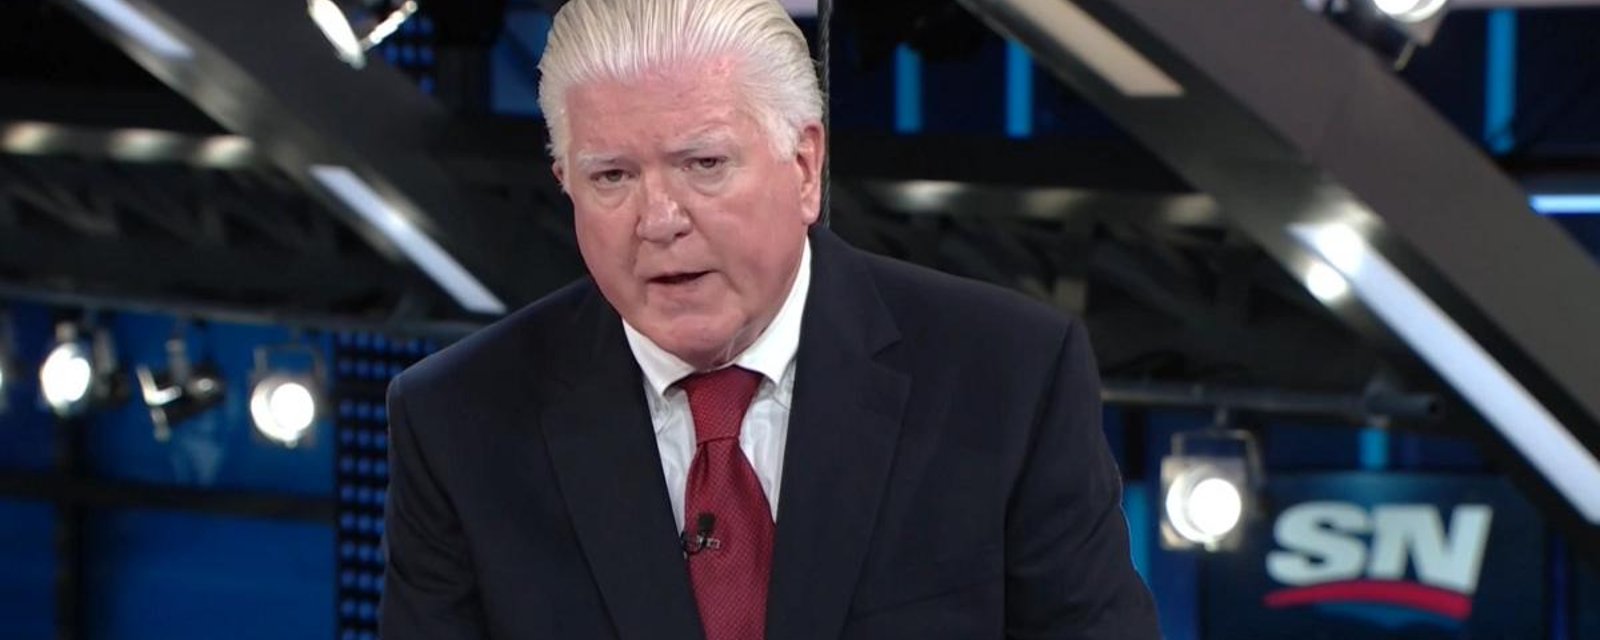 Brian Burke says Canadian teams have advantages when it comes to signing UFAs.